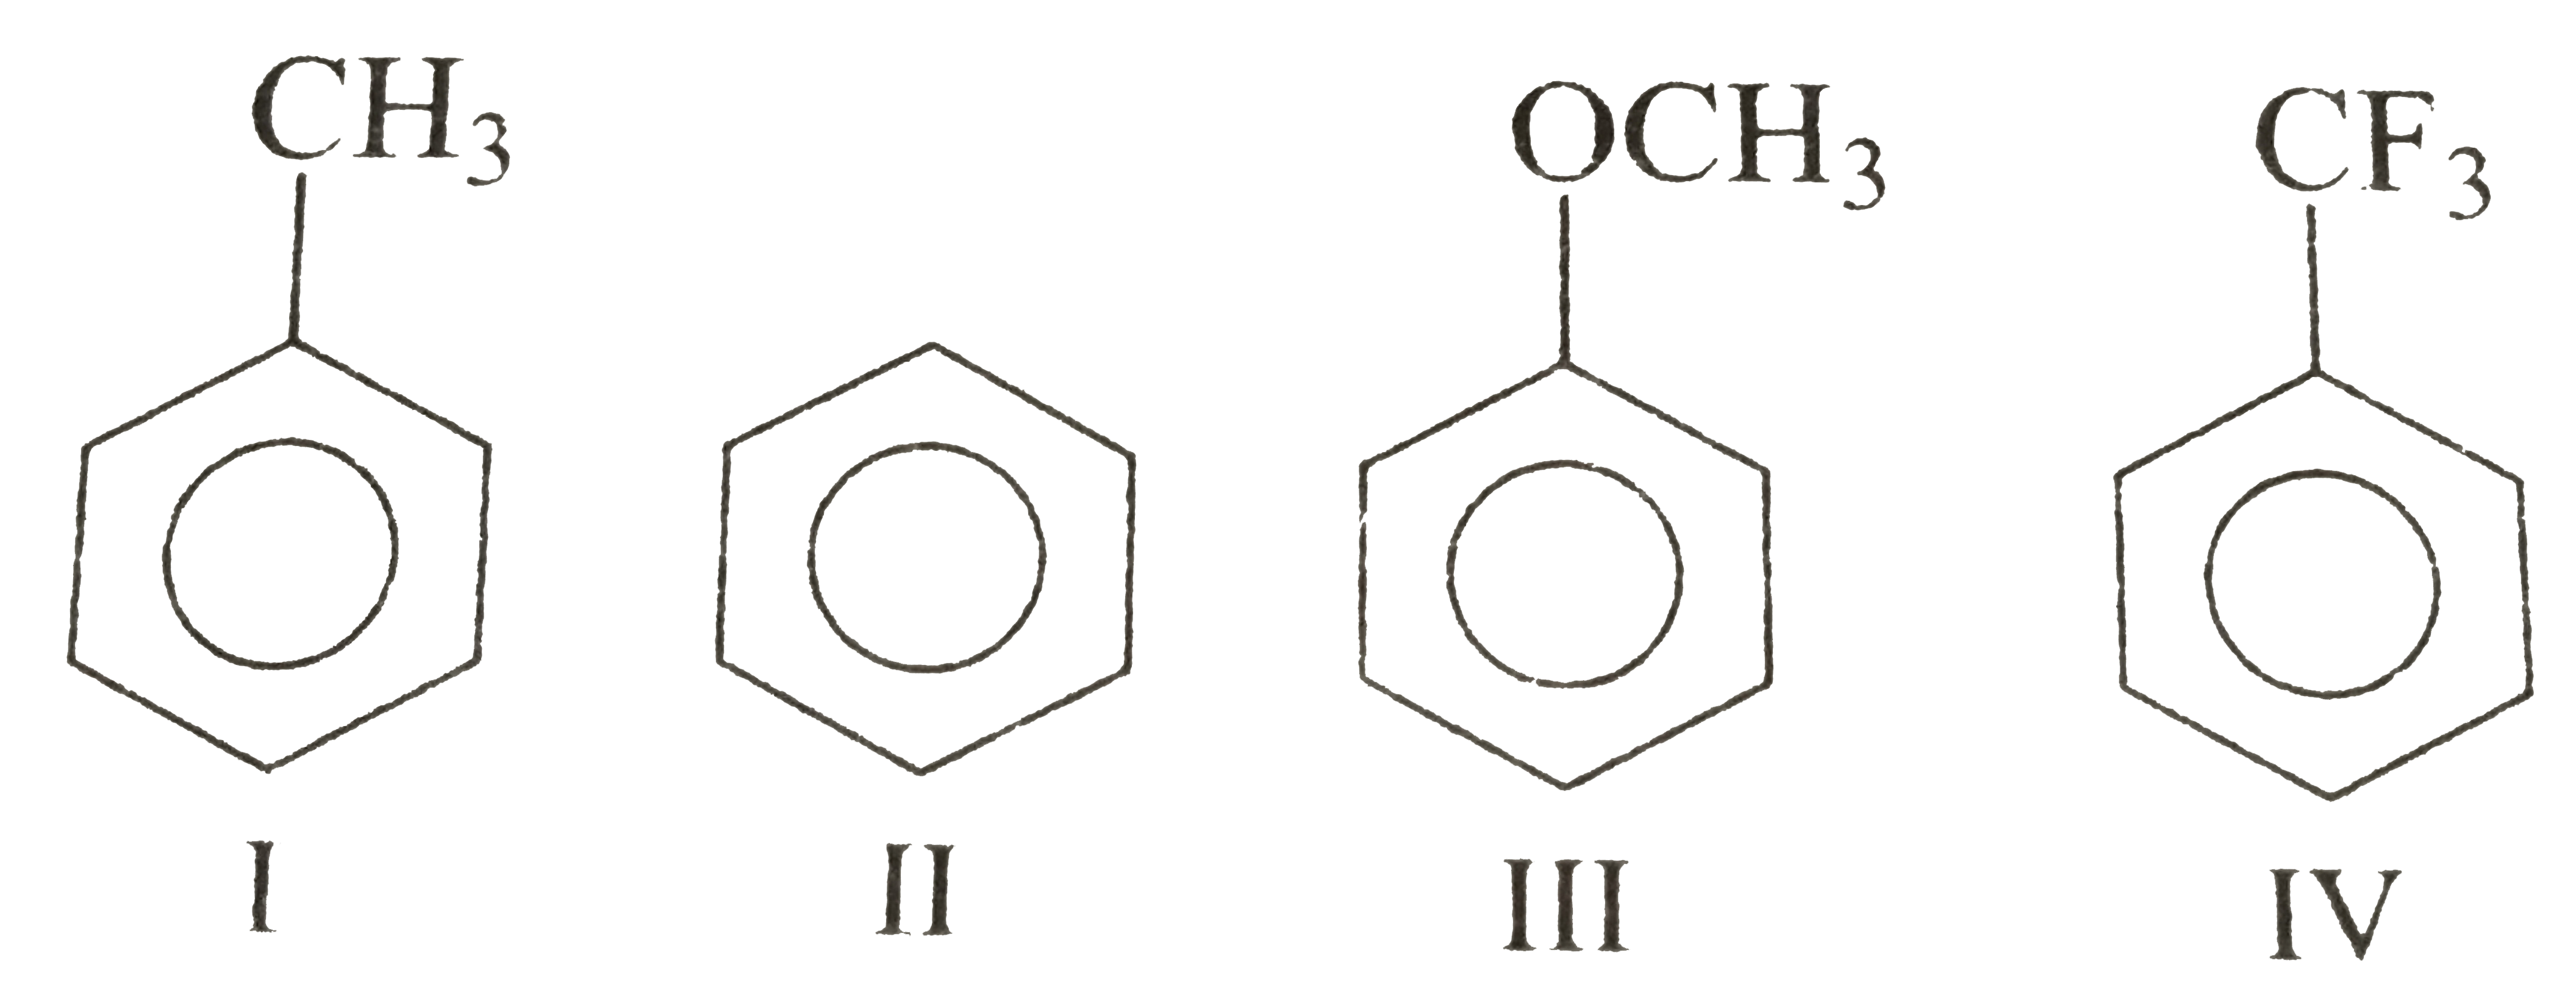 Among the compounds the  order  of decreasing  reactivity towards electrophilic substance is :